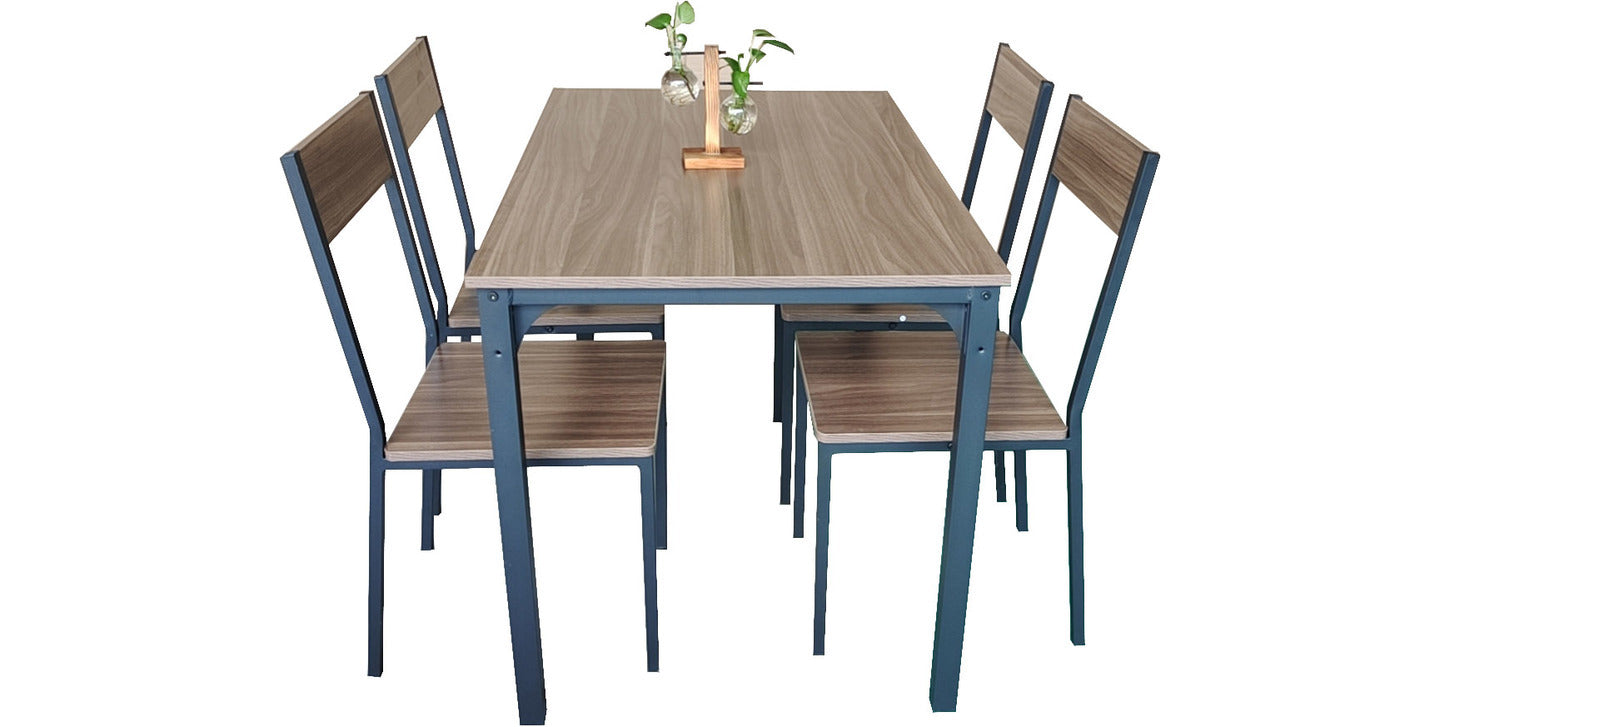 5 Piece Kitchen Dining Room Table and Chairs Set Furniture